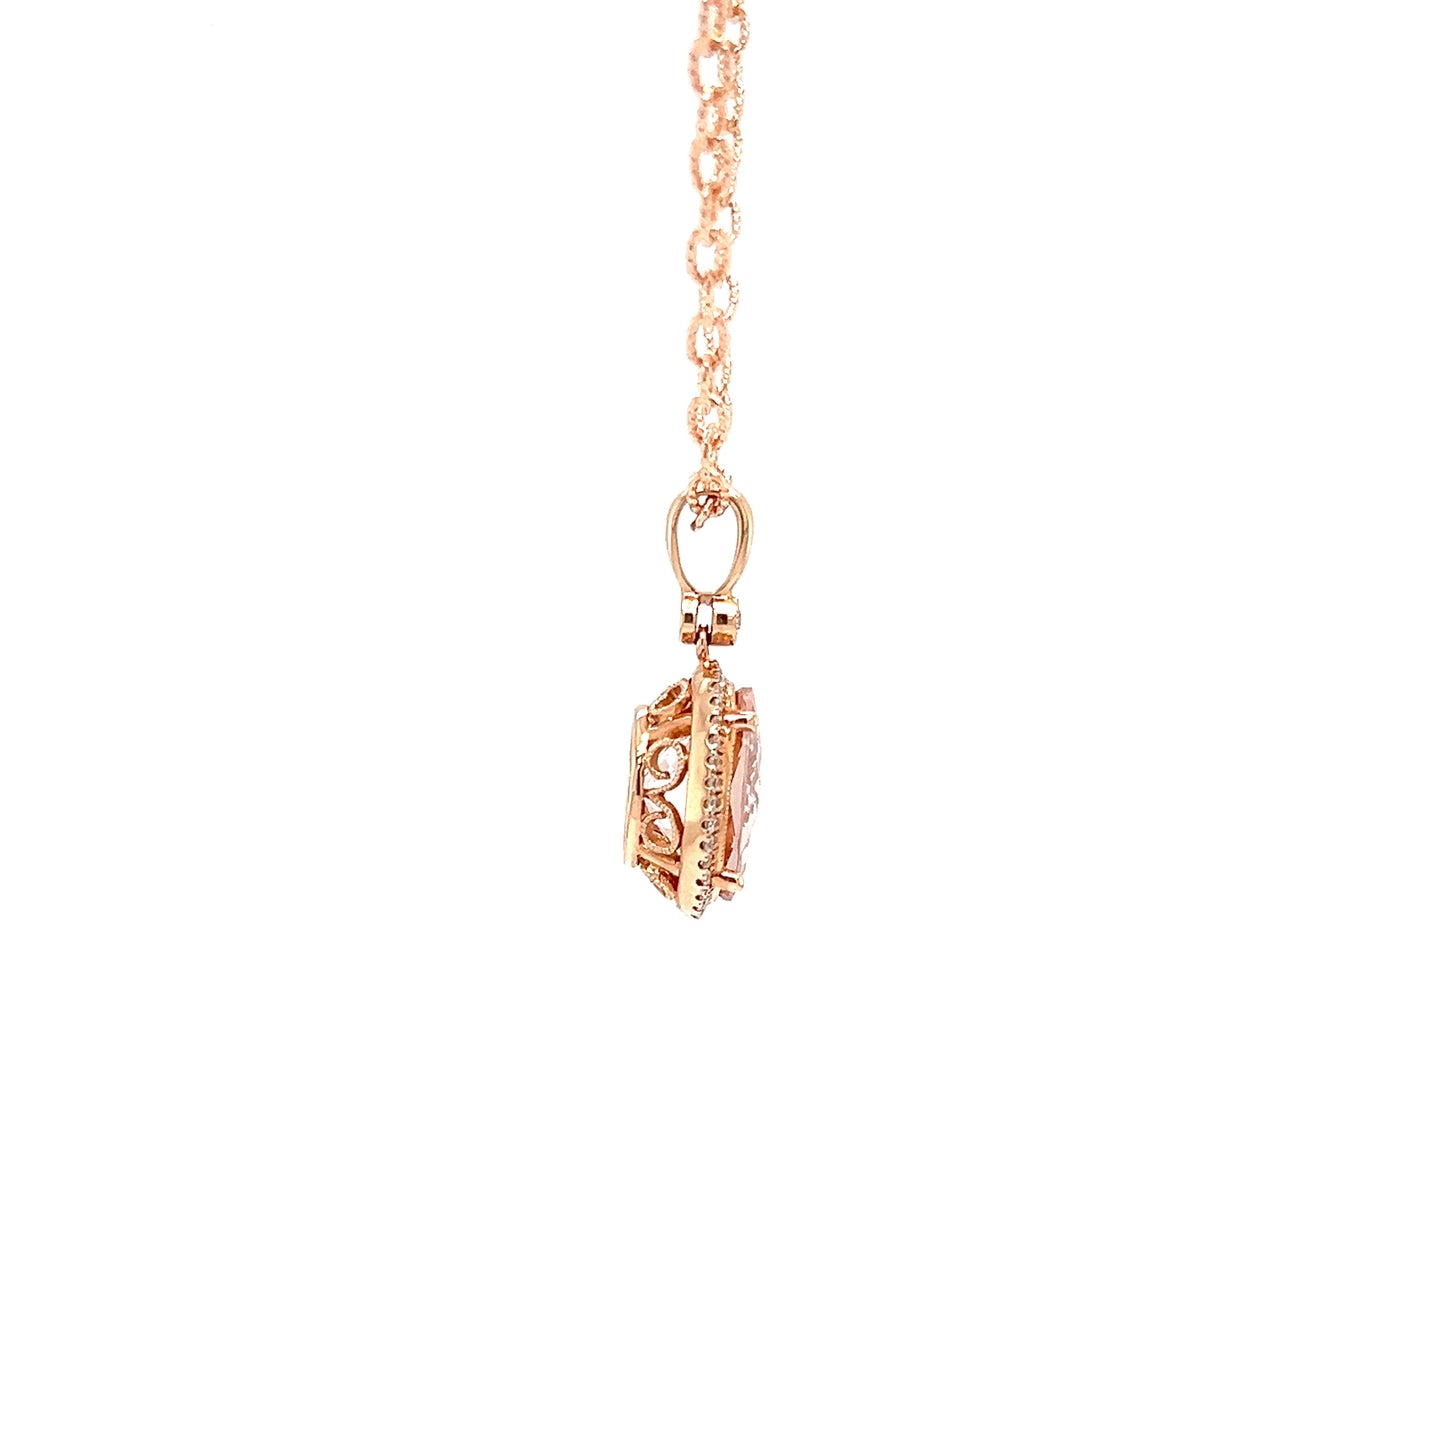 Oval Morganite Necklace with Diamond Halo in 14K Rose Gold. Basket Left View